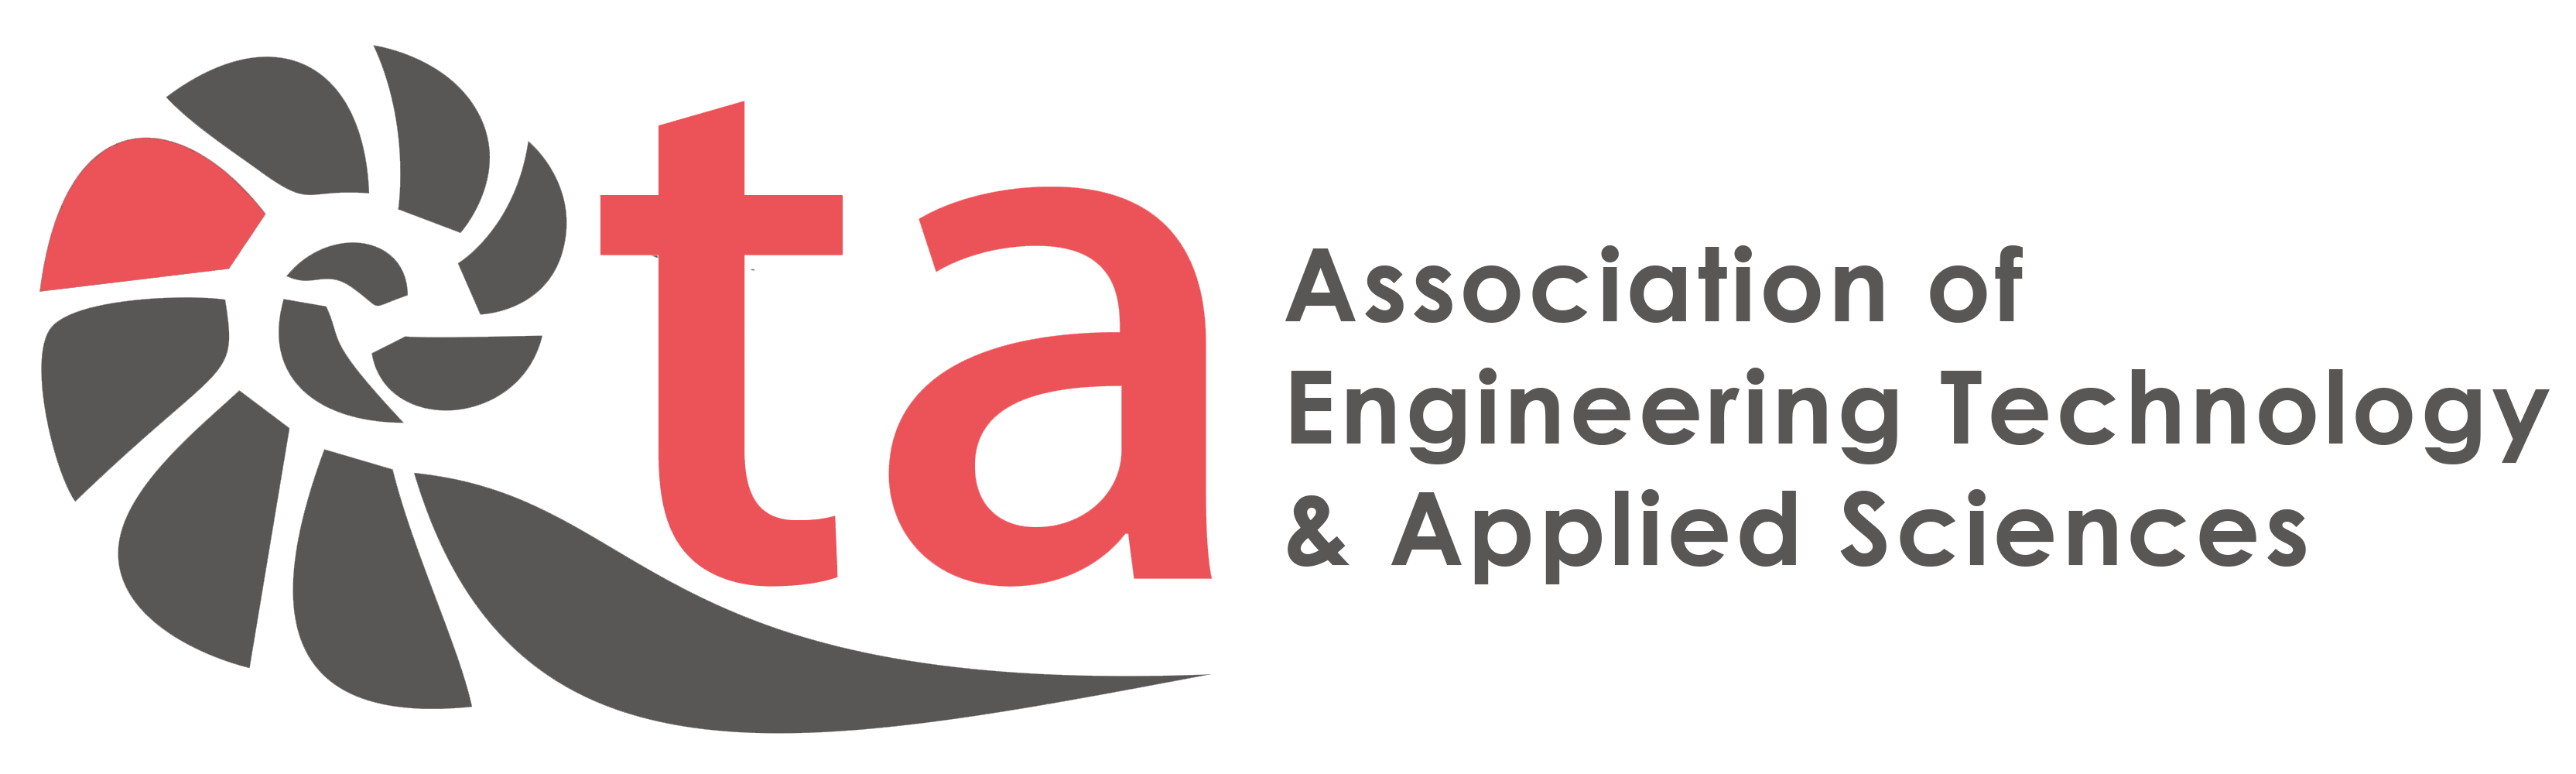 AETA International Conference on Advanced Engineering Technology, Science Management, Applied Sciences & Information and Communication Tech ESAI